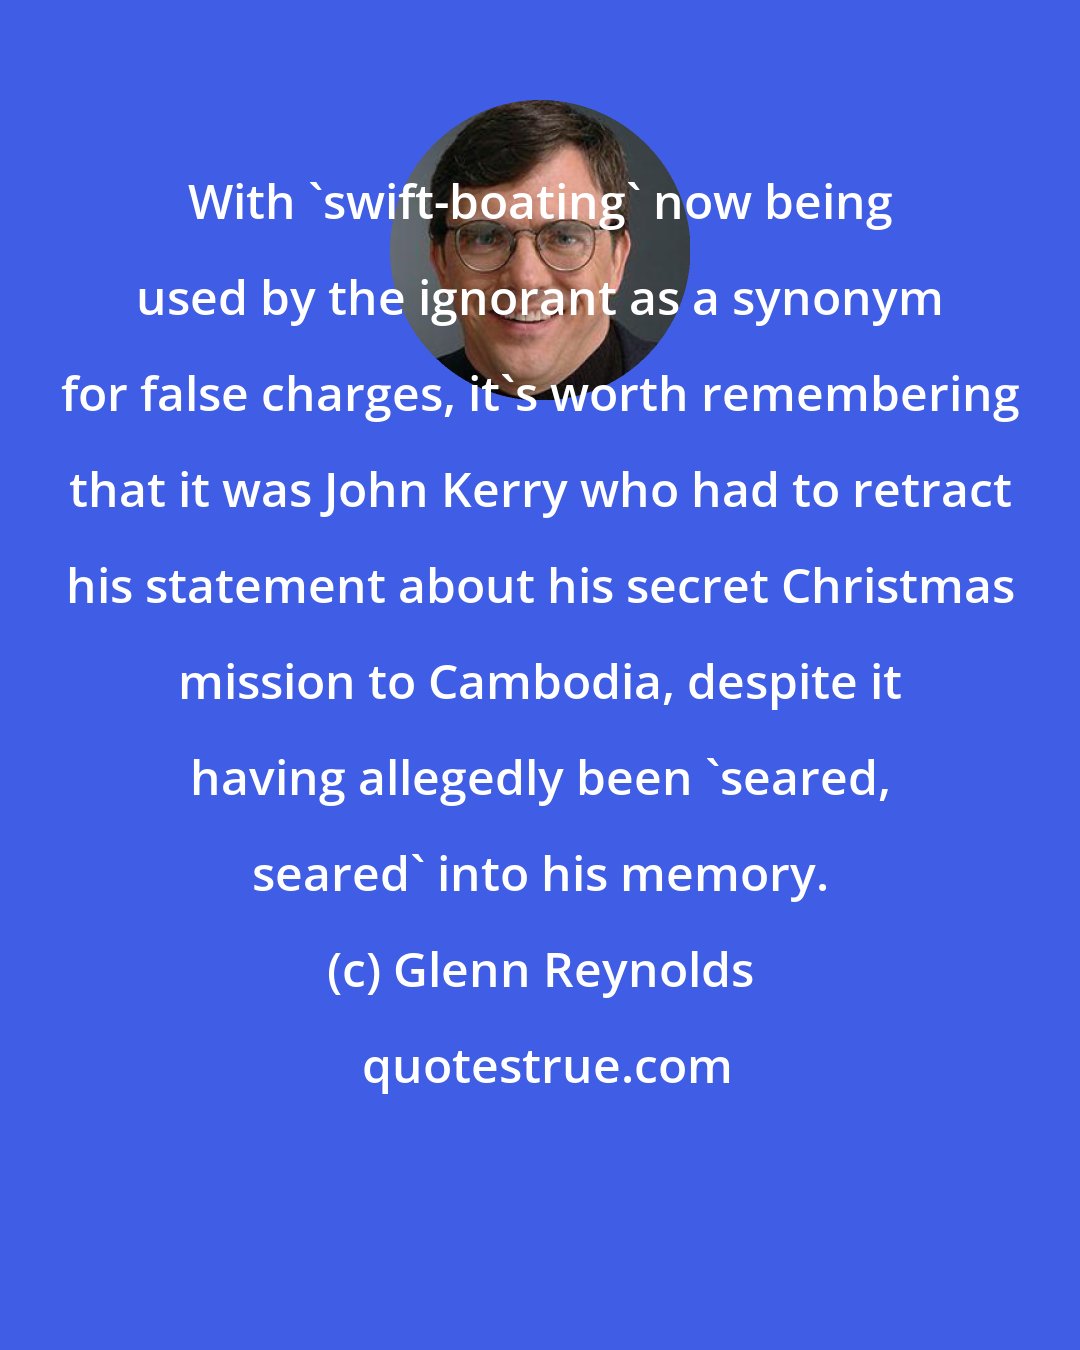 Glenn Reynolds: With 'swift-boating' now being used by the ignorant as a synonym for false charges, it's worth remembering that it was John Kerry who had to retract his statement about his secret Christmas mission to Cambodia, despite it having allegedly been 'seared, seared' into his memory.